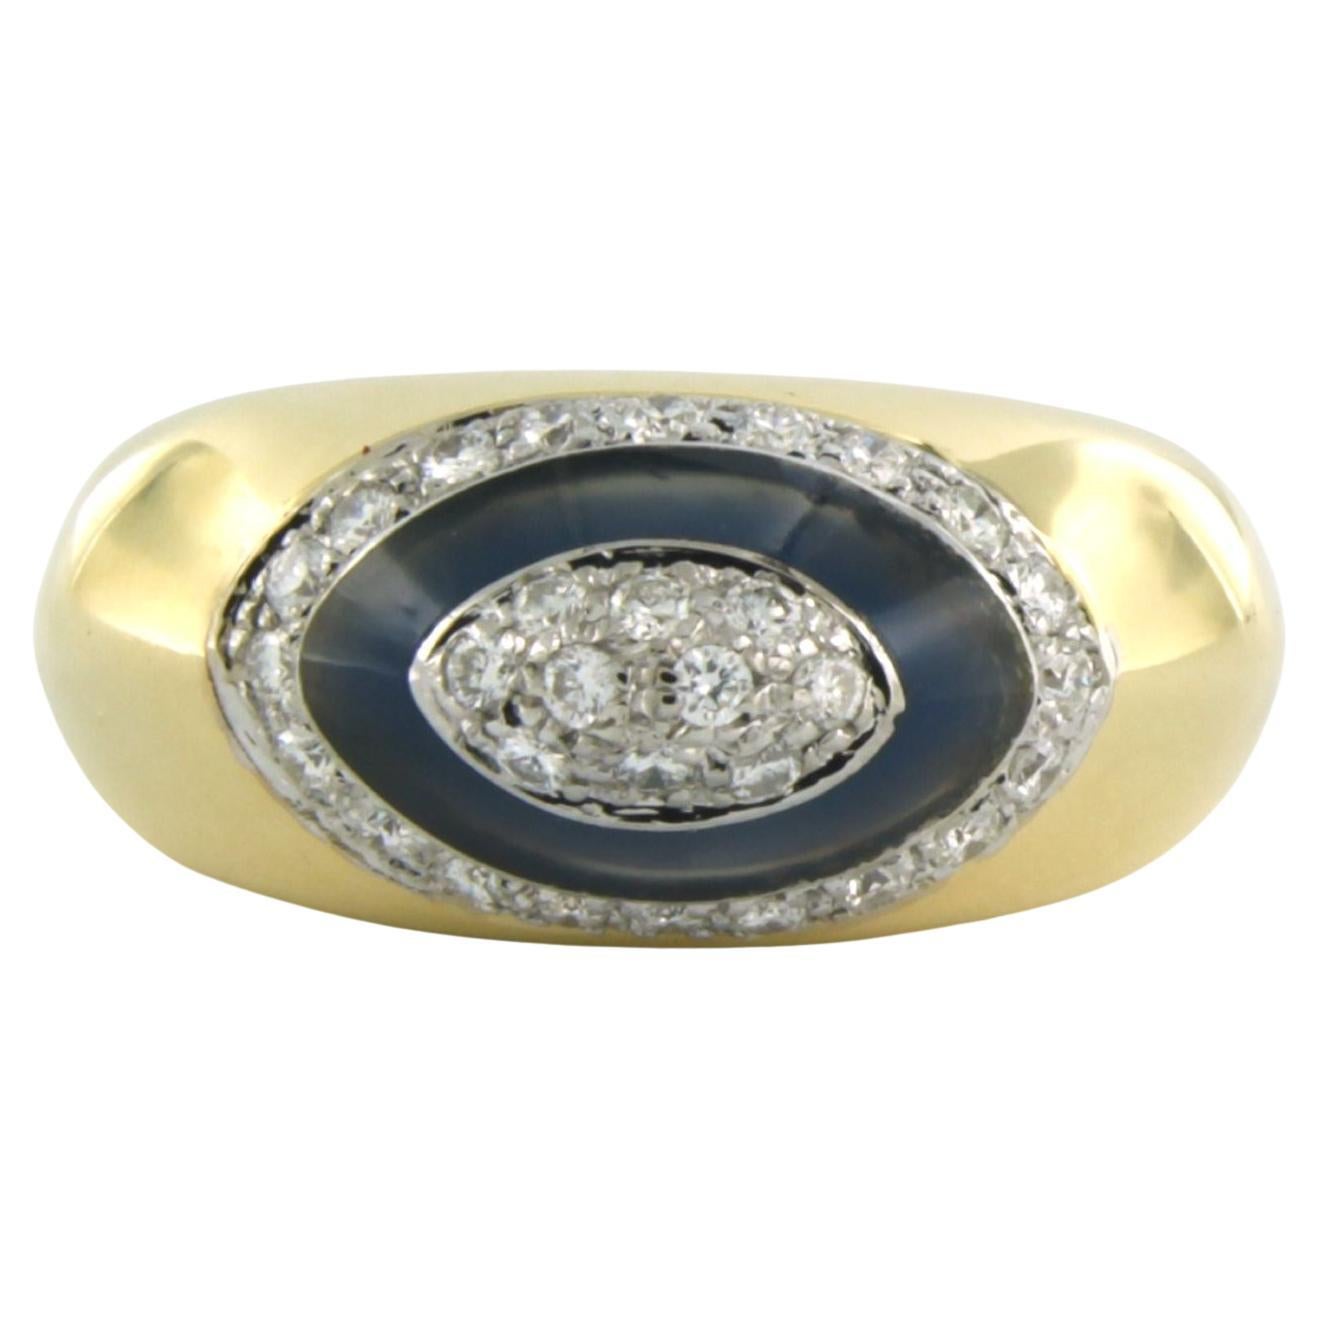 Fashion ring set with brilliant cut diamonds and enamel 18k yellow gold